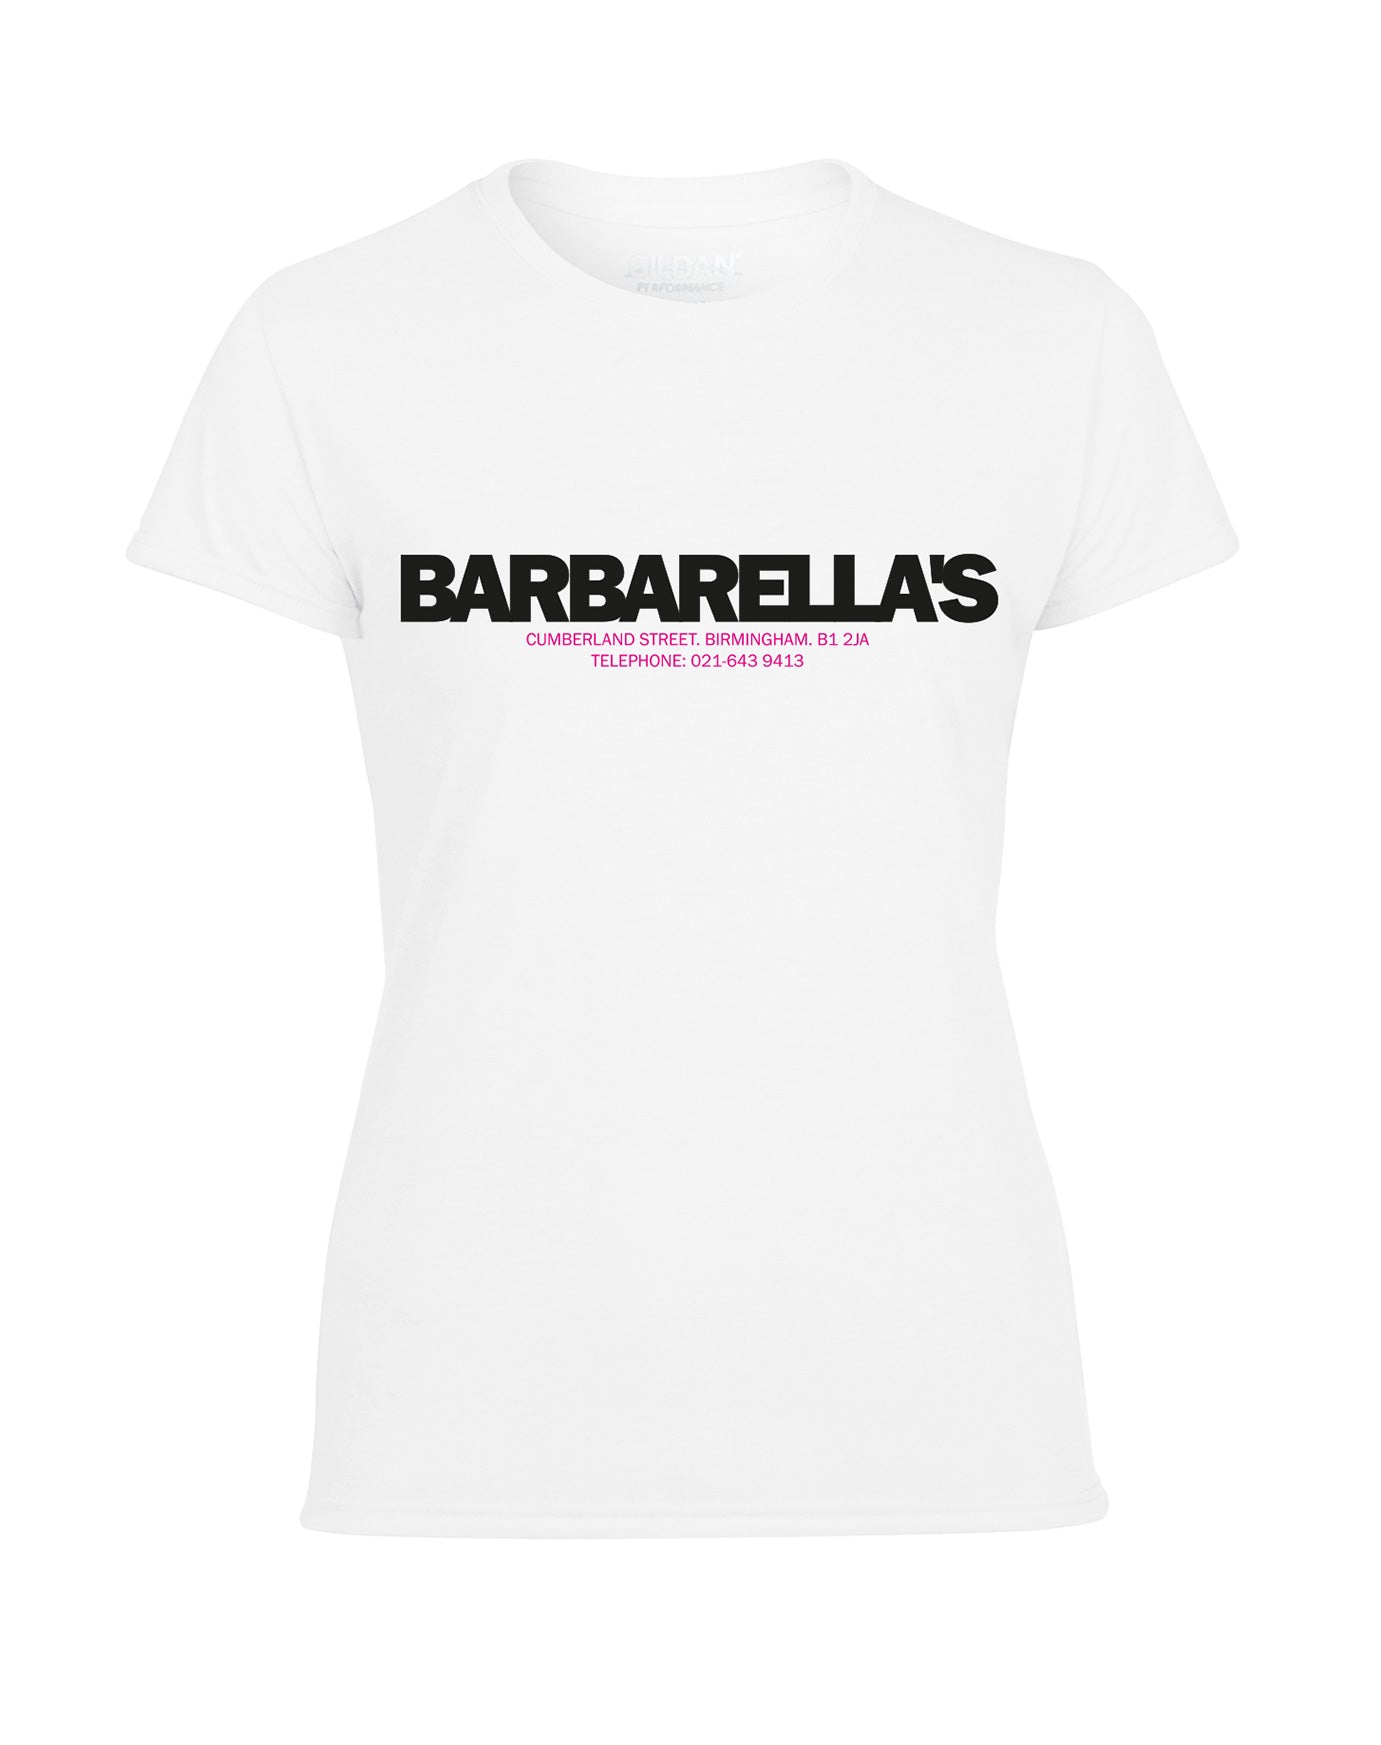 Barbarella's ladies fit T-shirt - various colours - Dirty Stop Outs